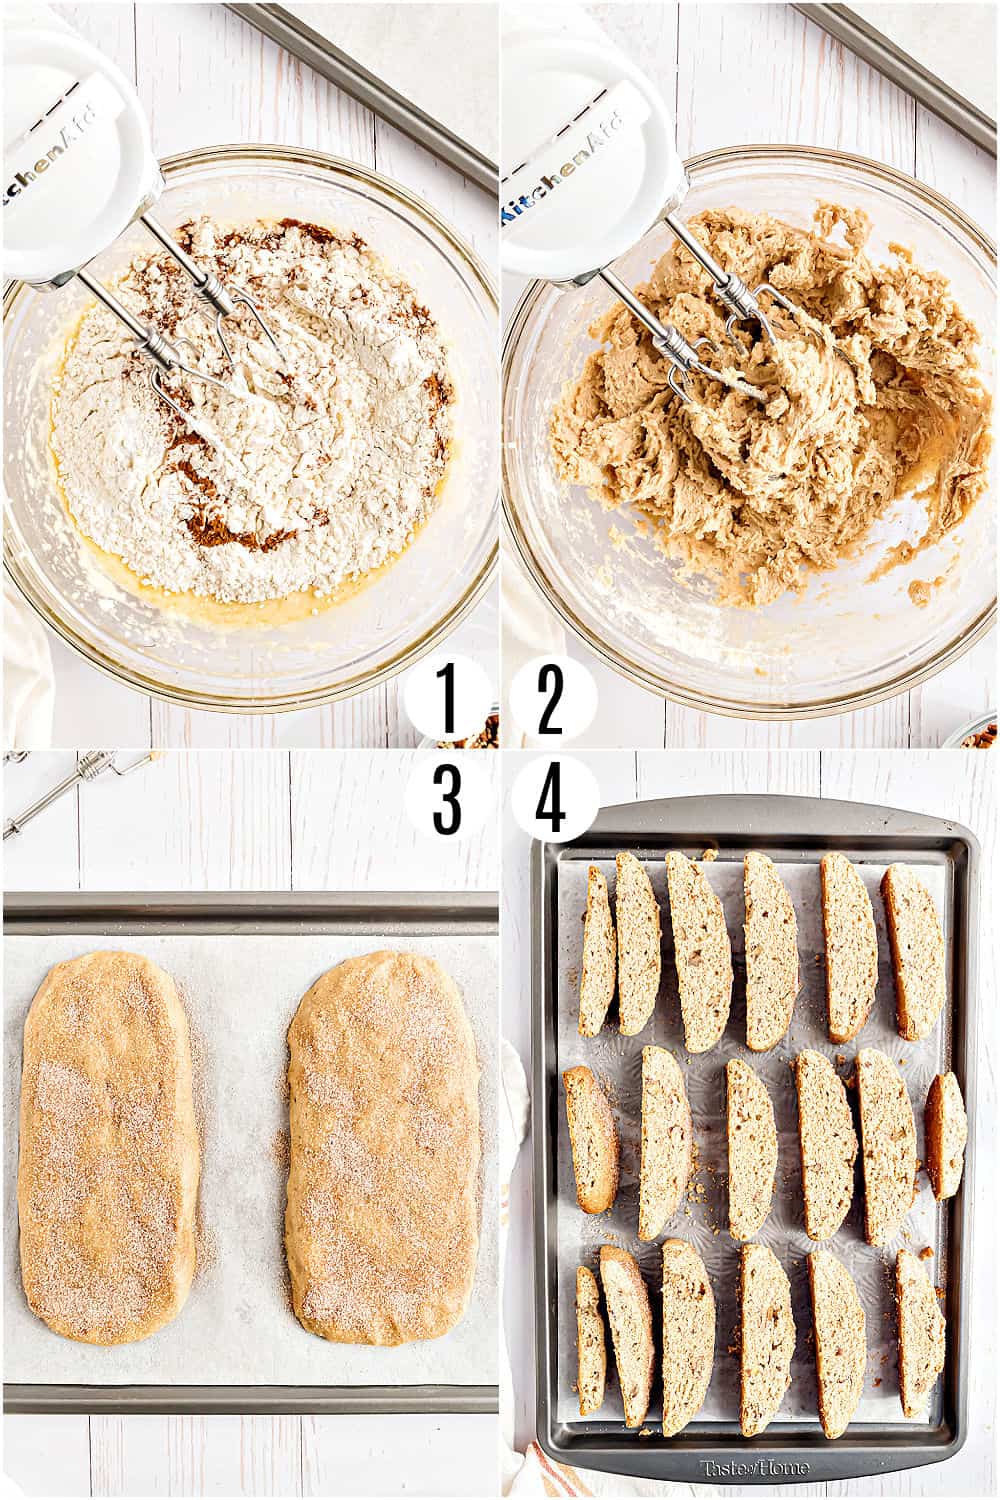 Step by step photos showing how to make snickerdoodle biscotti.